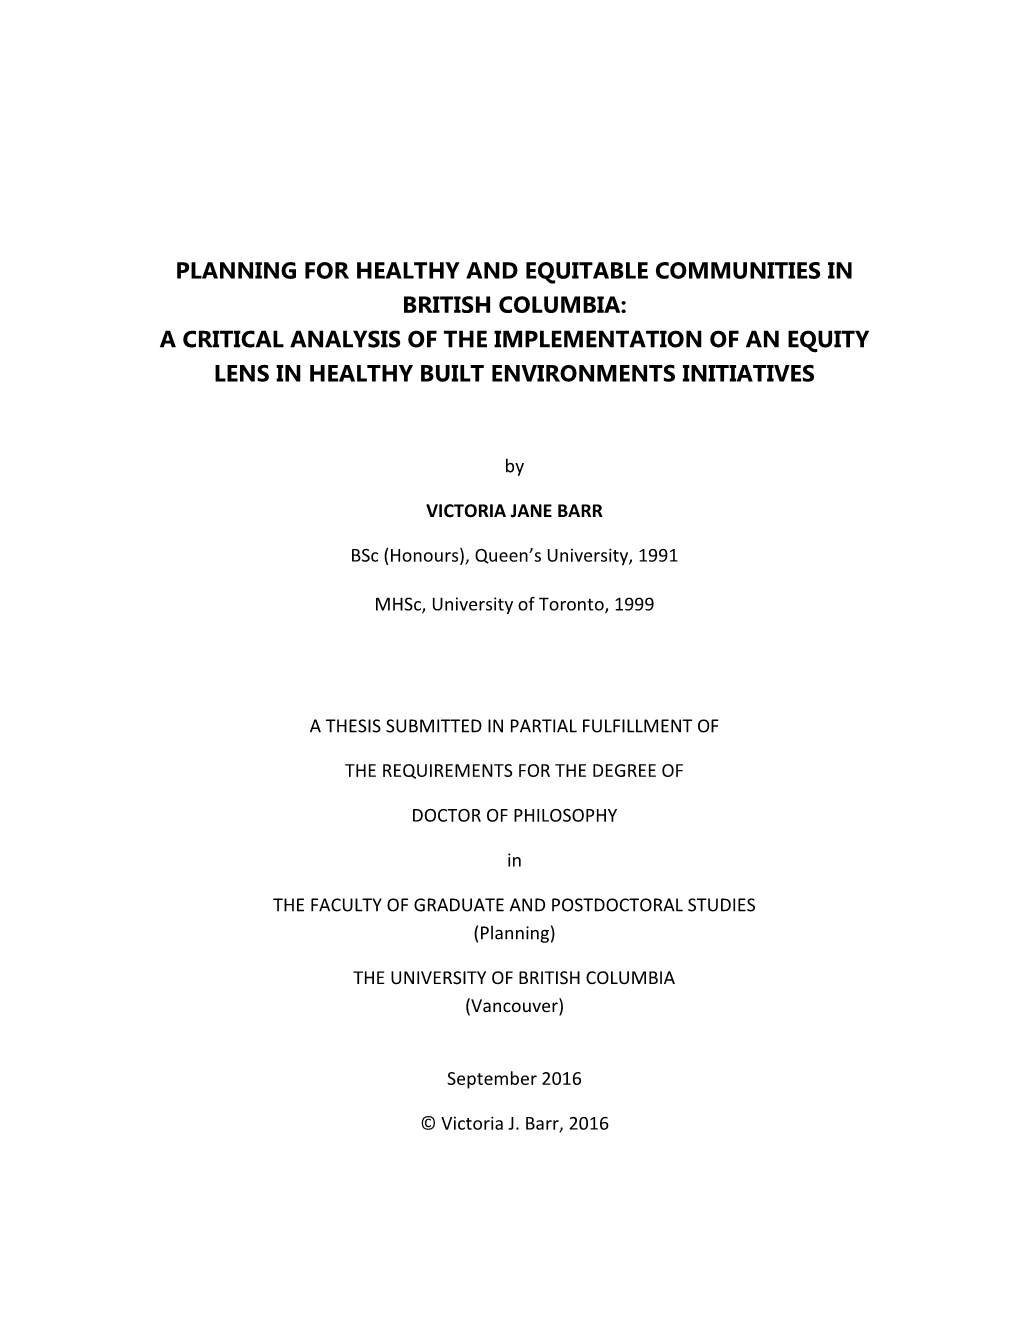 Equity Lens in Healthy Built Environments Initiatives